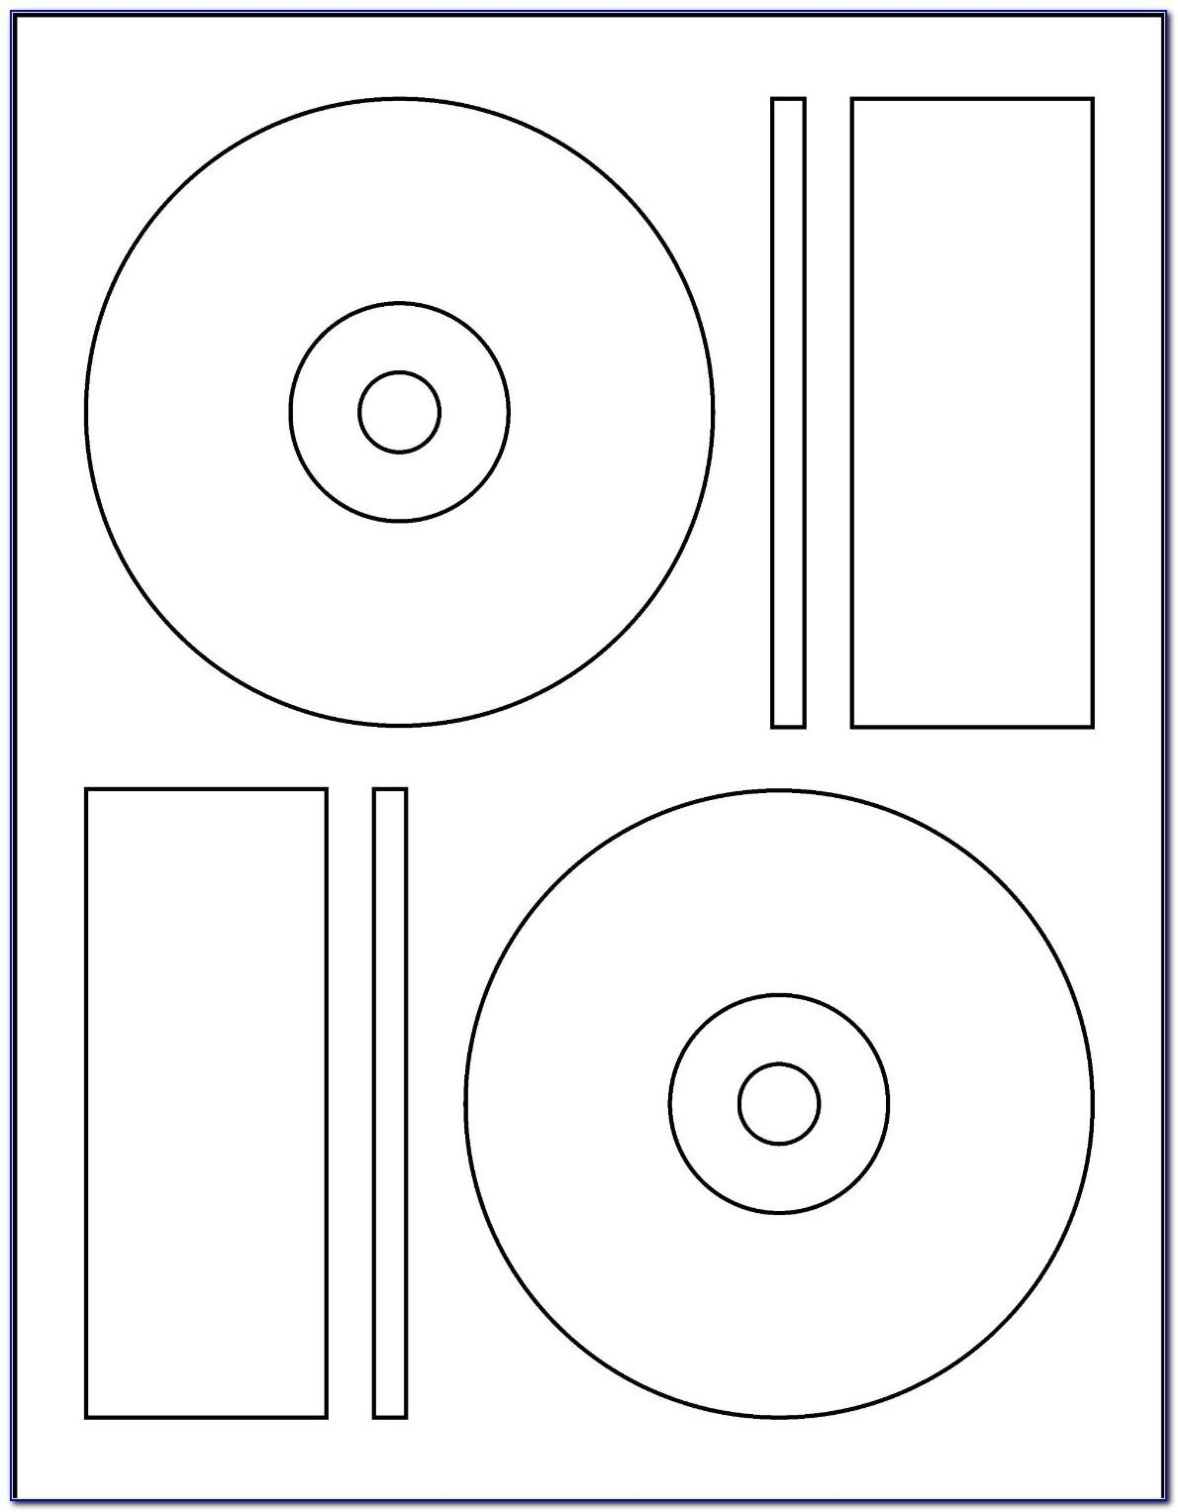 Free Memorex Cd Label Template For Word - Get Free Templates Within Free Memorex Cd Label Template For Word